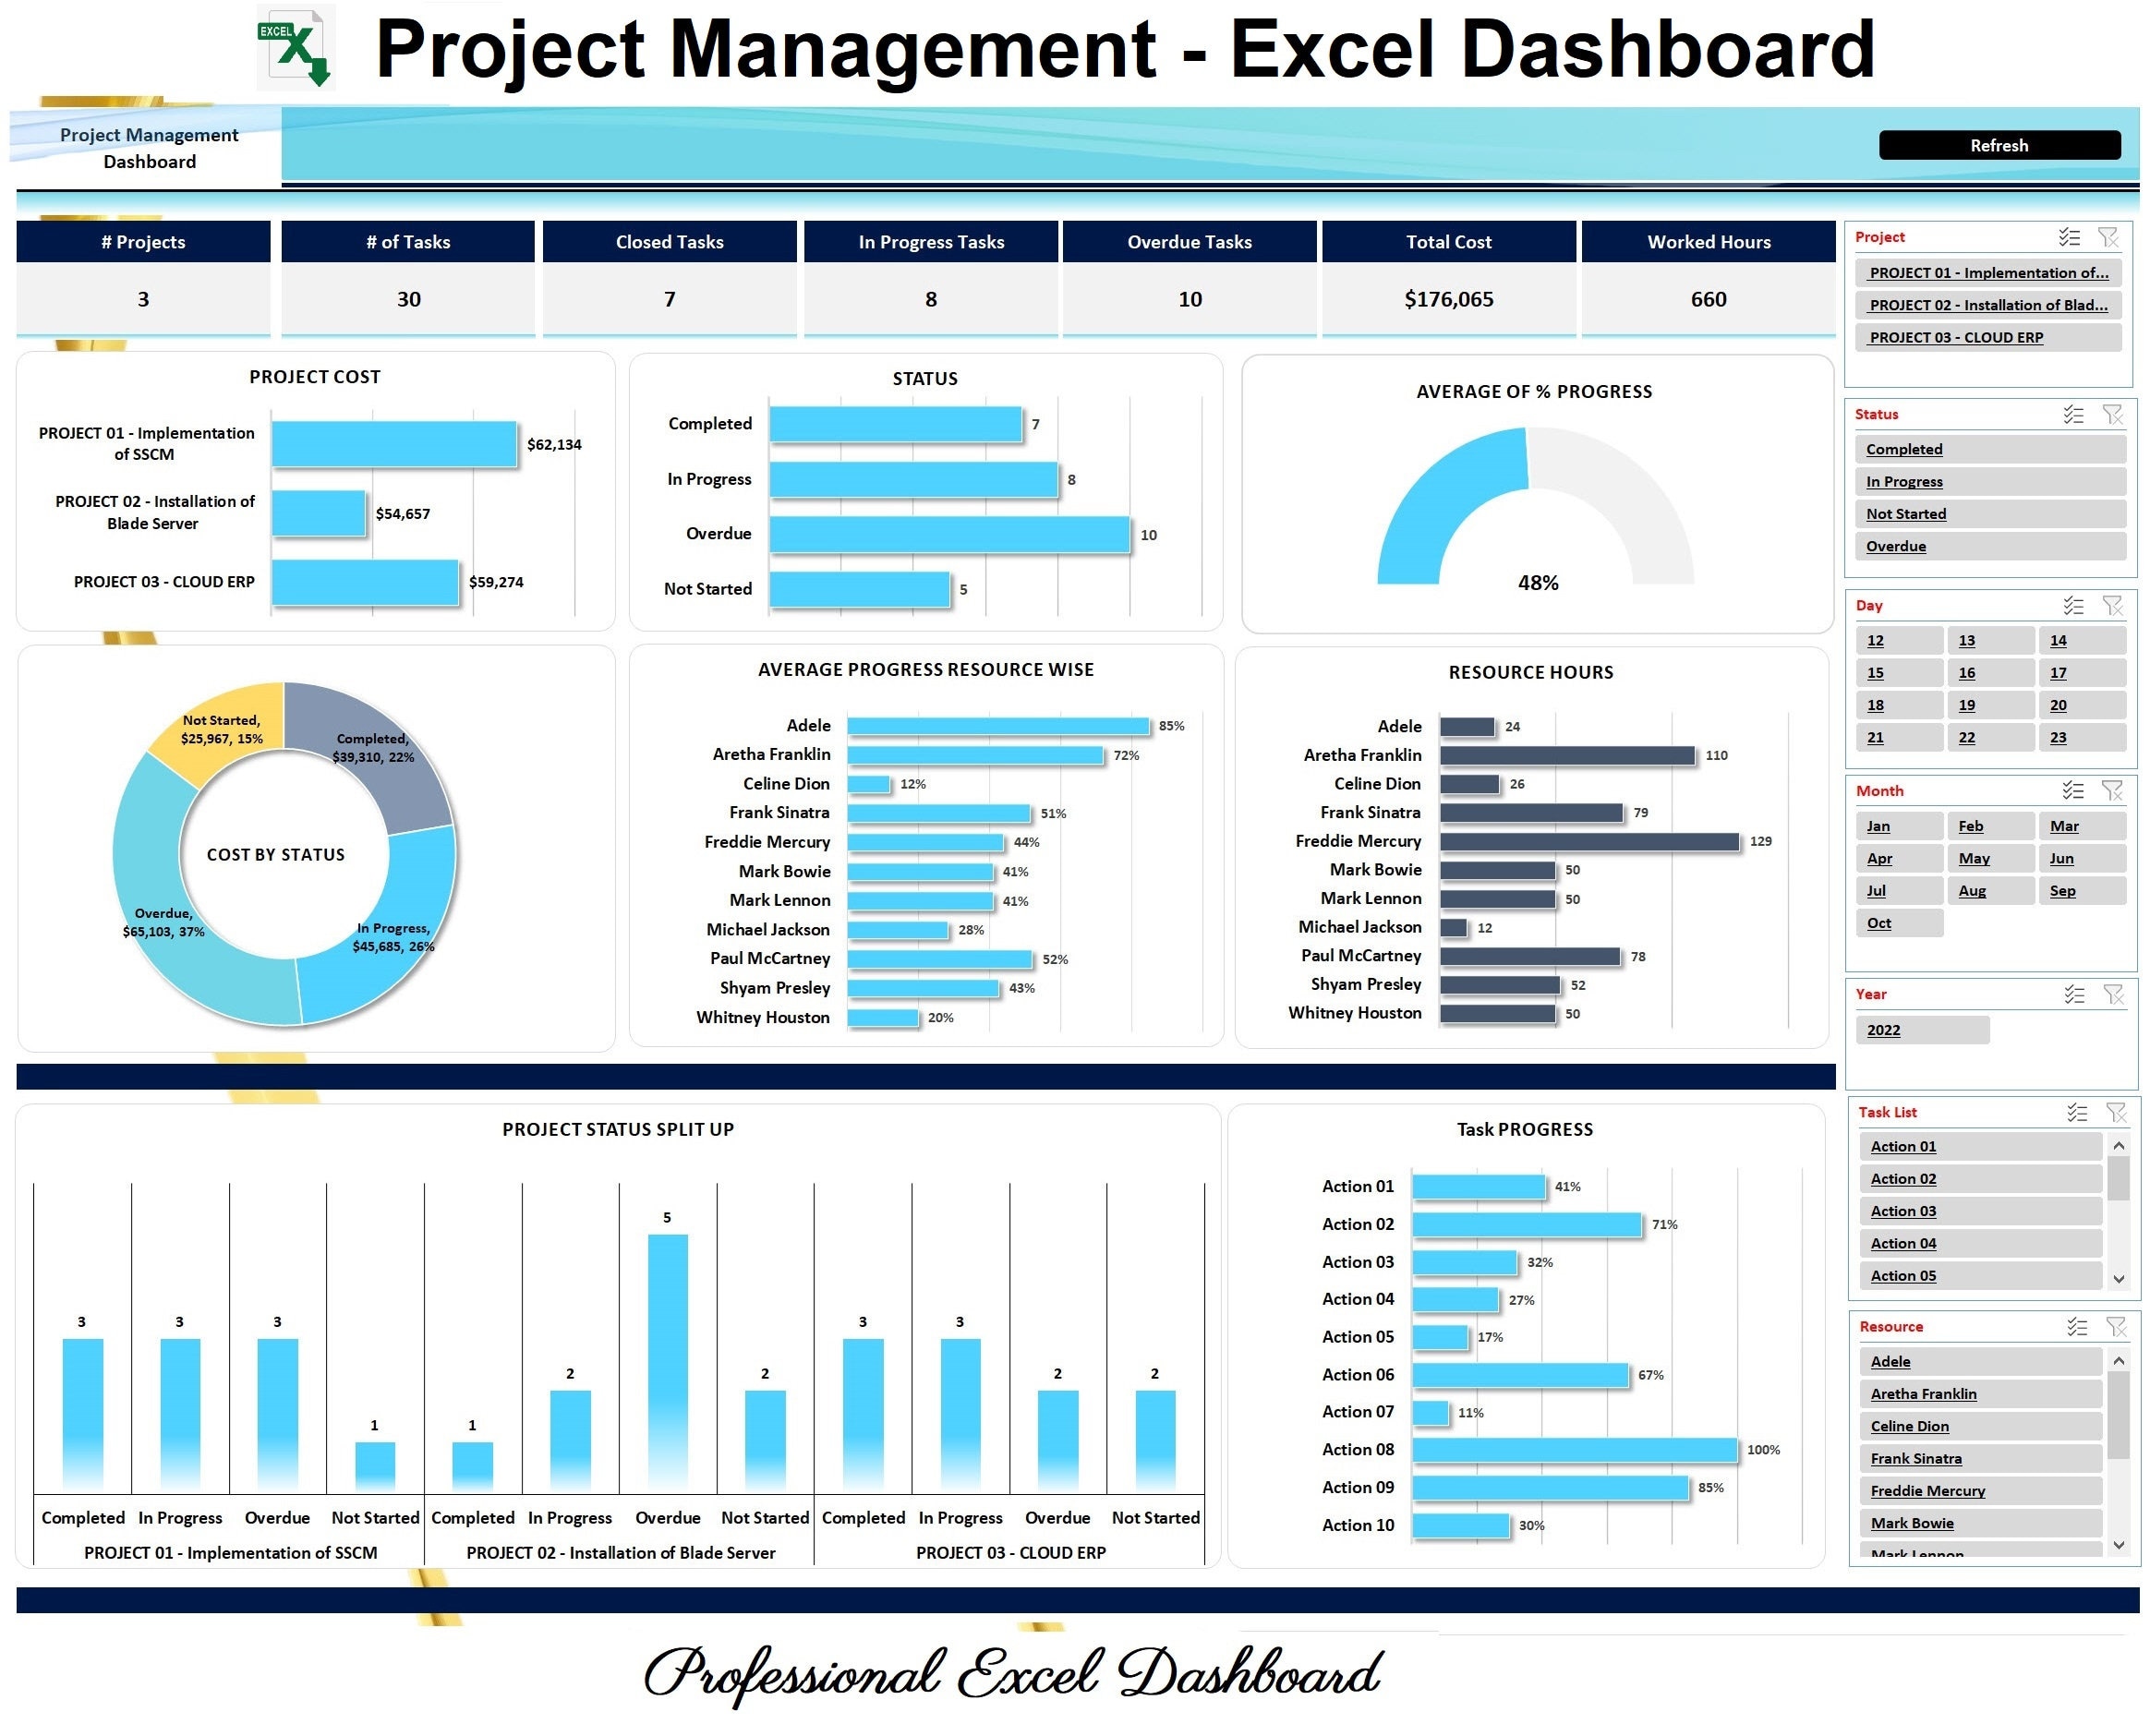 Project Management Dashboard Benefits